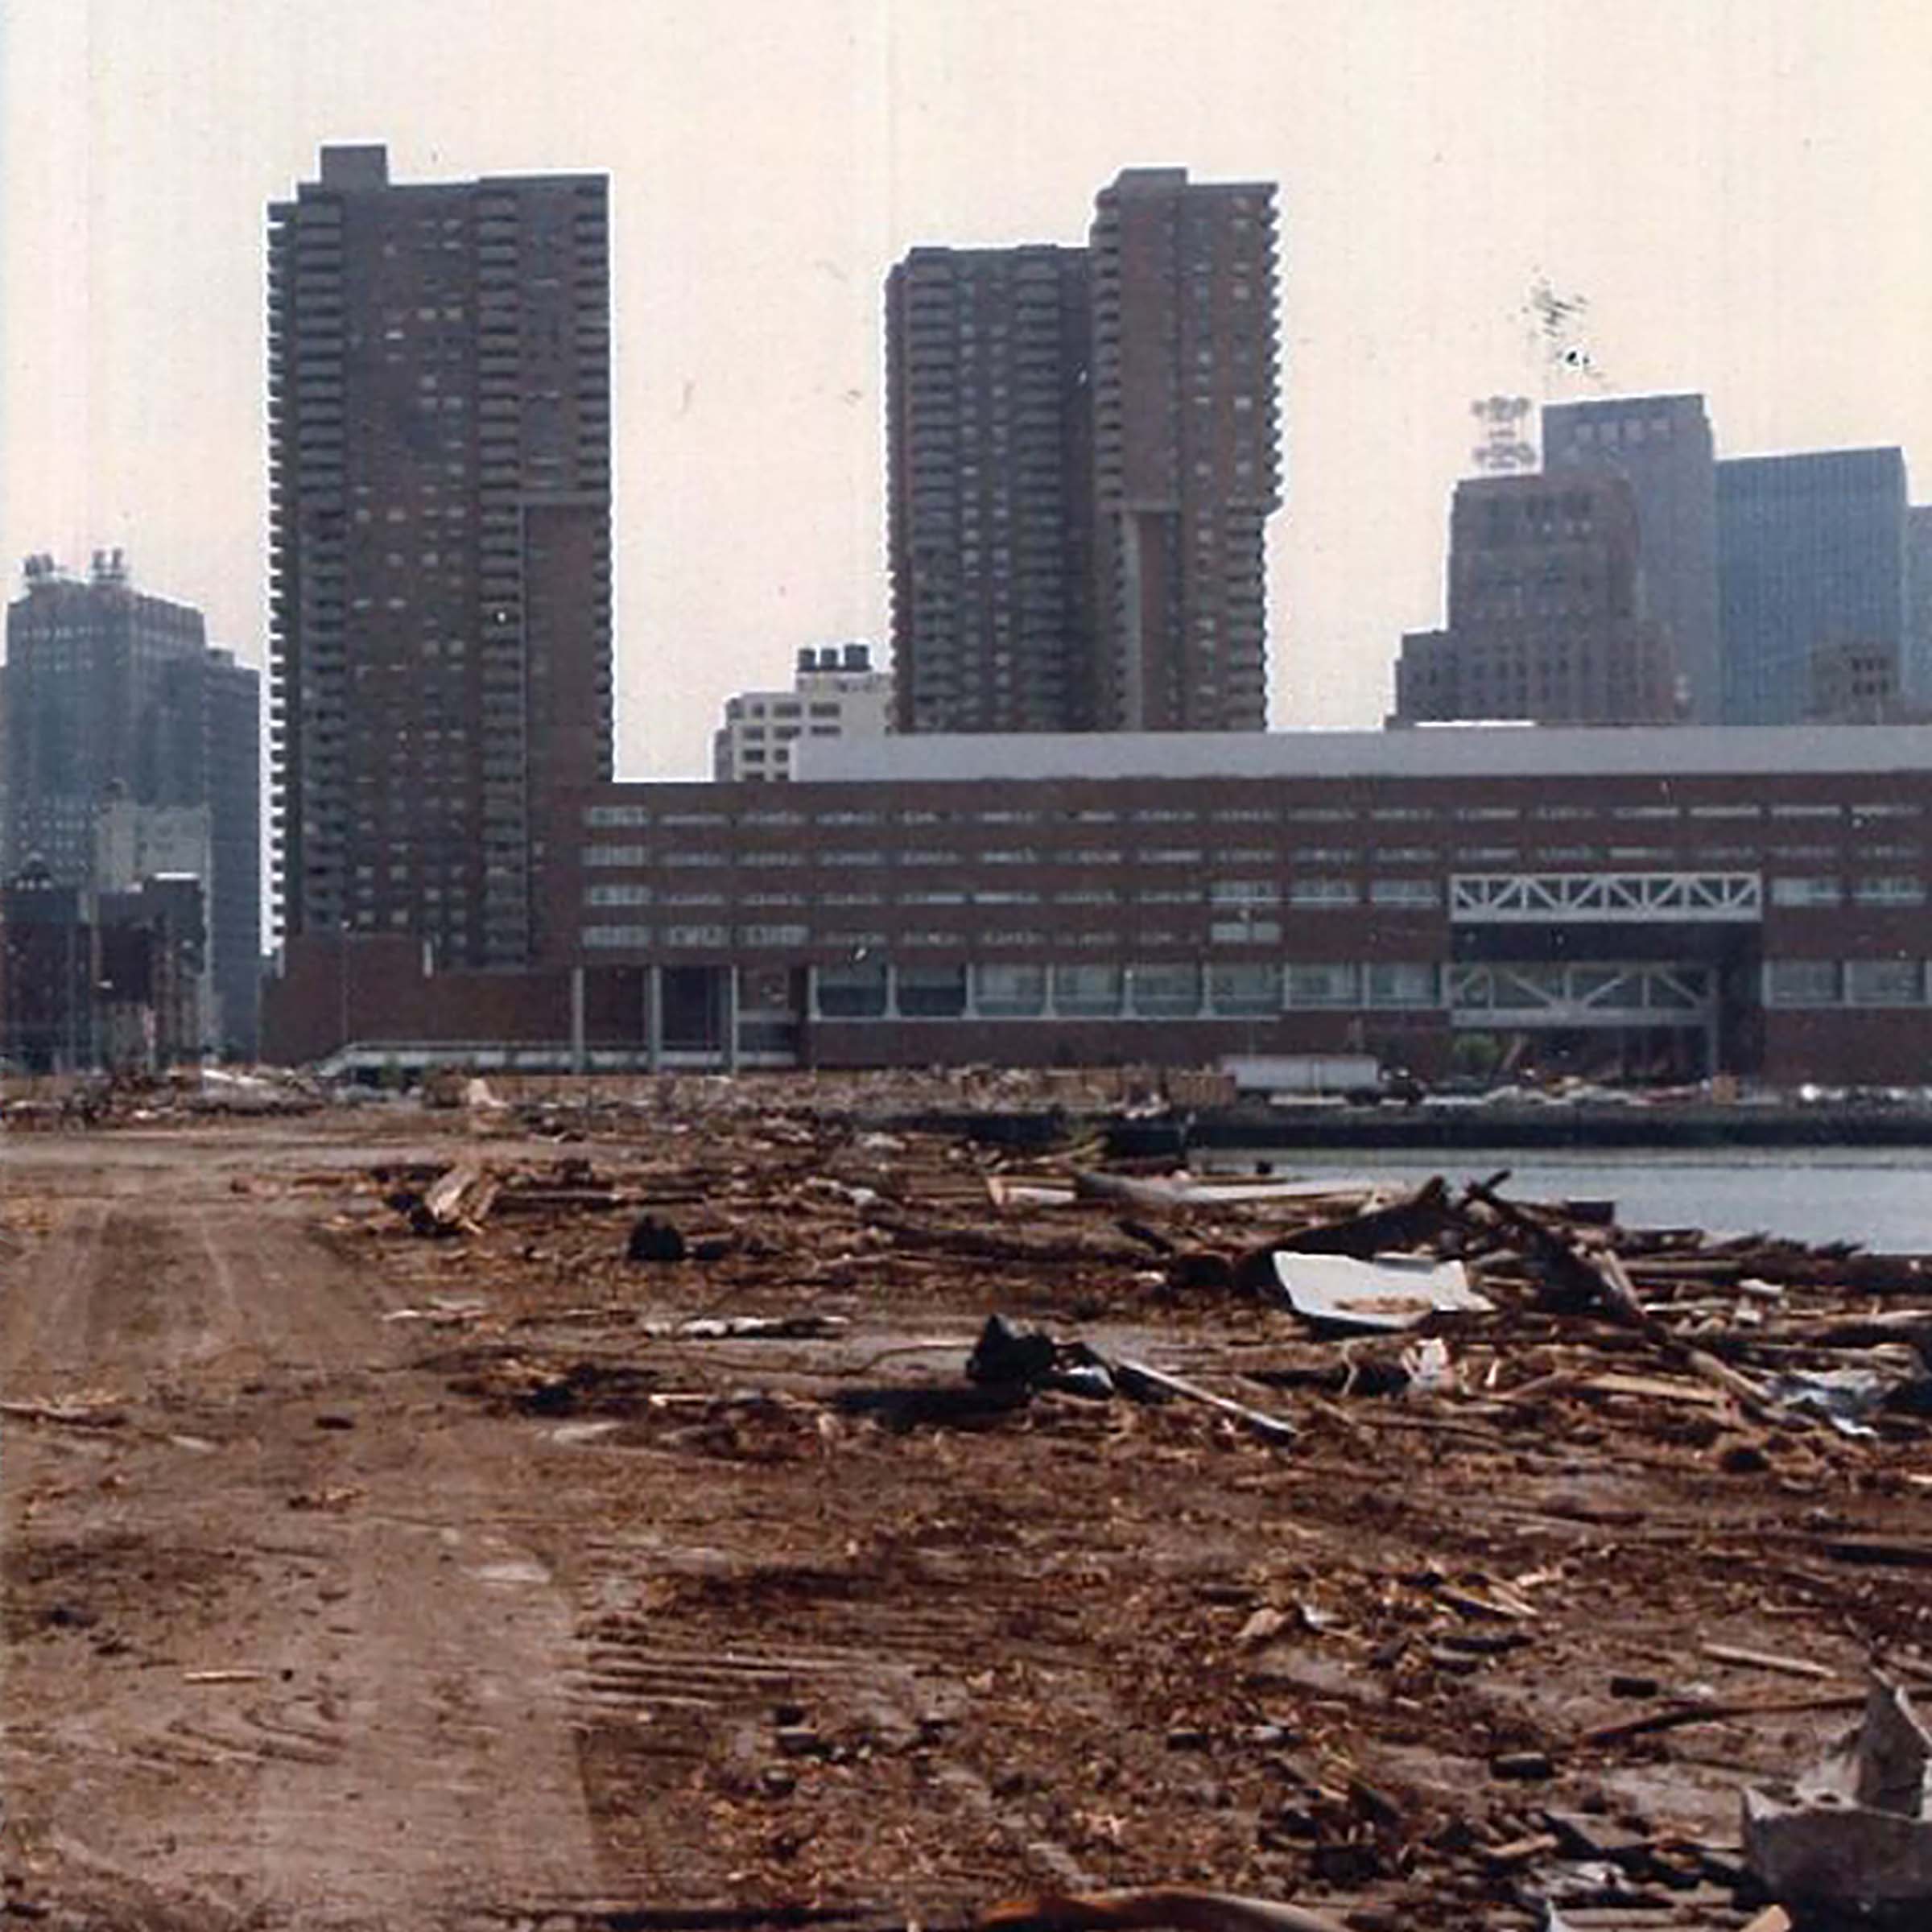 Pier 25, a wasteland before Hudson River Park transformed it, nothing but brown dirt